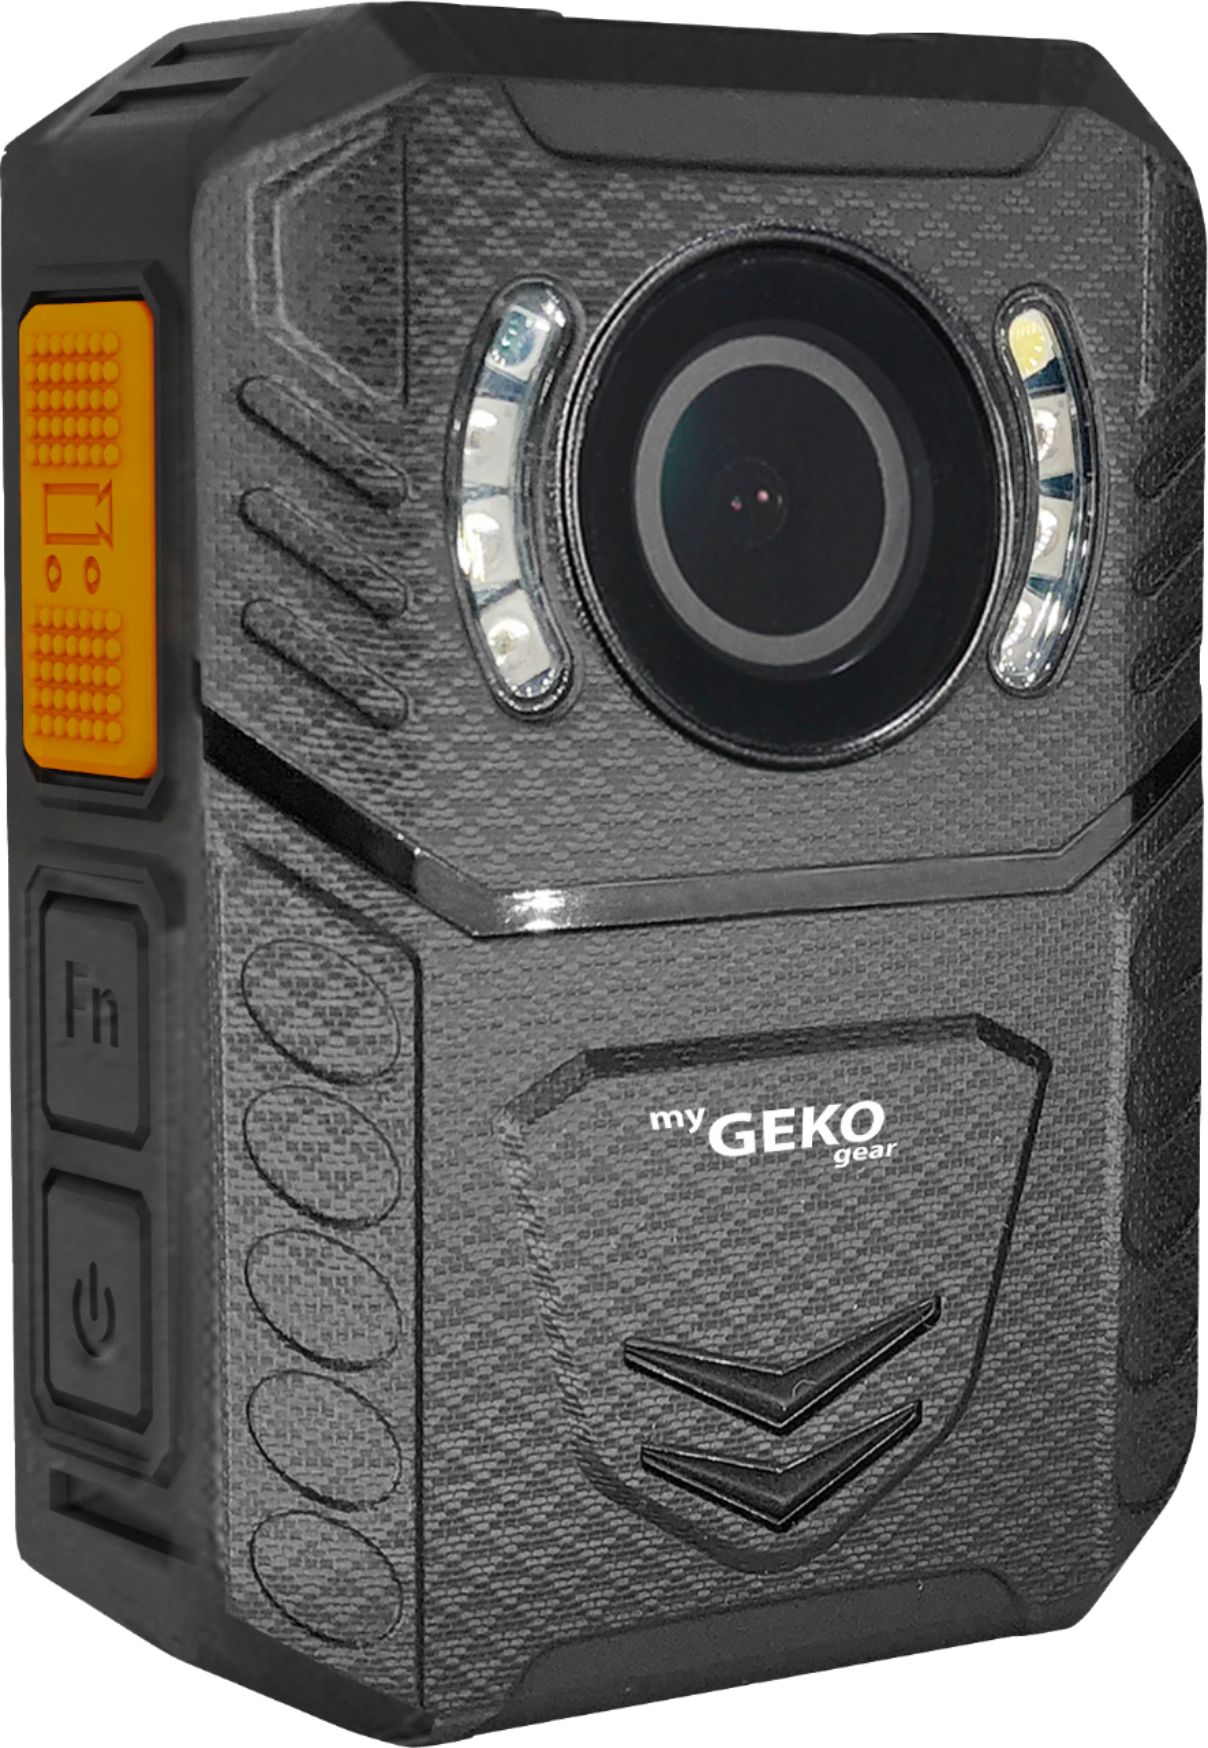 Angle View: myGEKOgear - Aegis 100 1296p Body Camera Infrared Lights Water Resistance with Password Protected System 32GB Memory